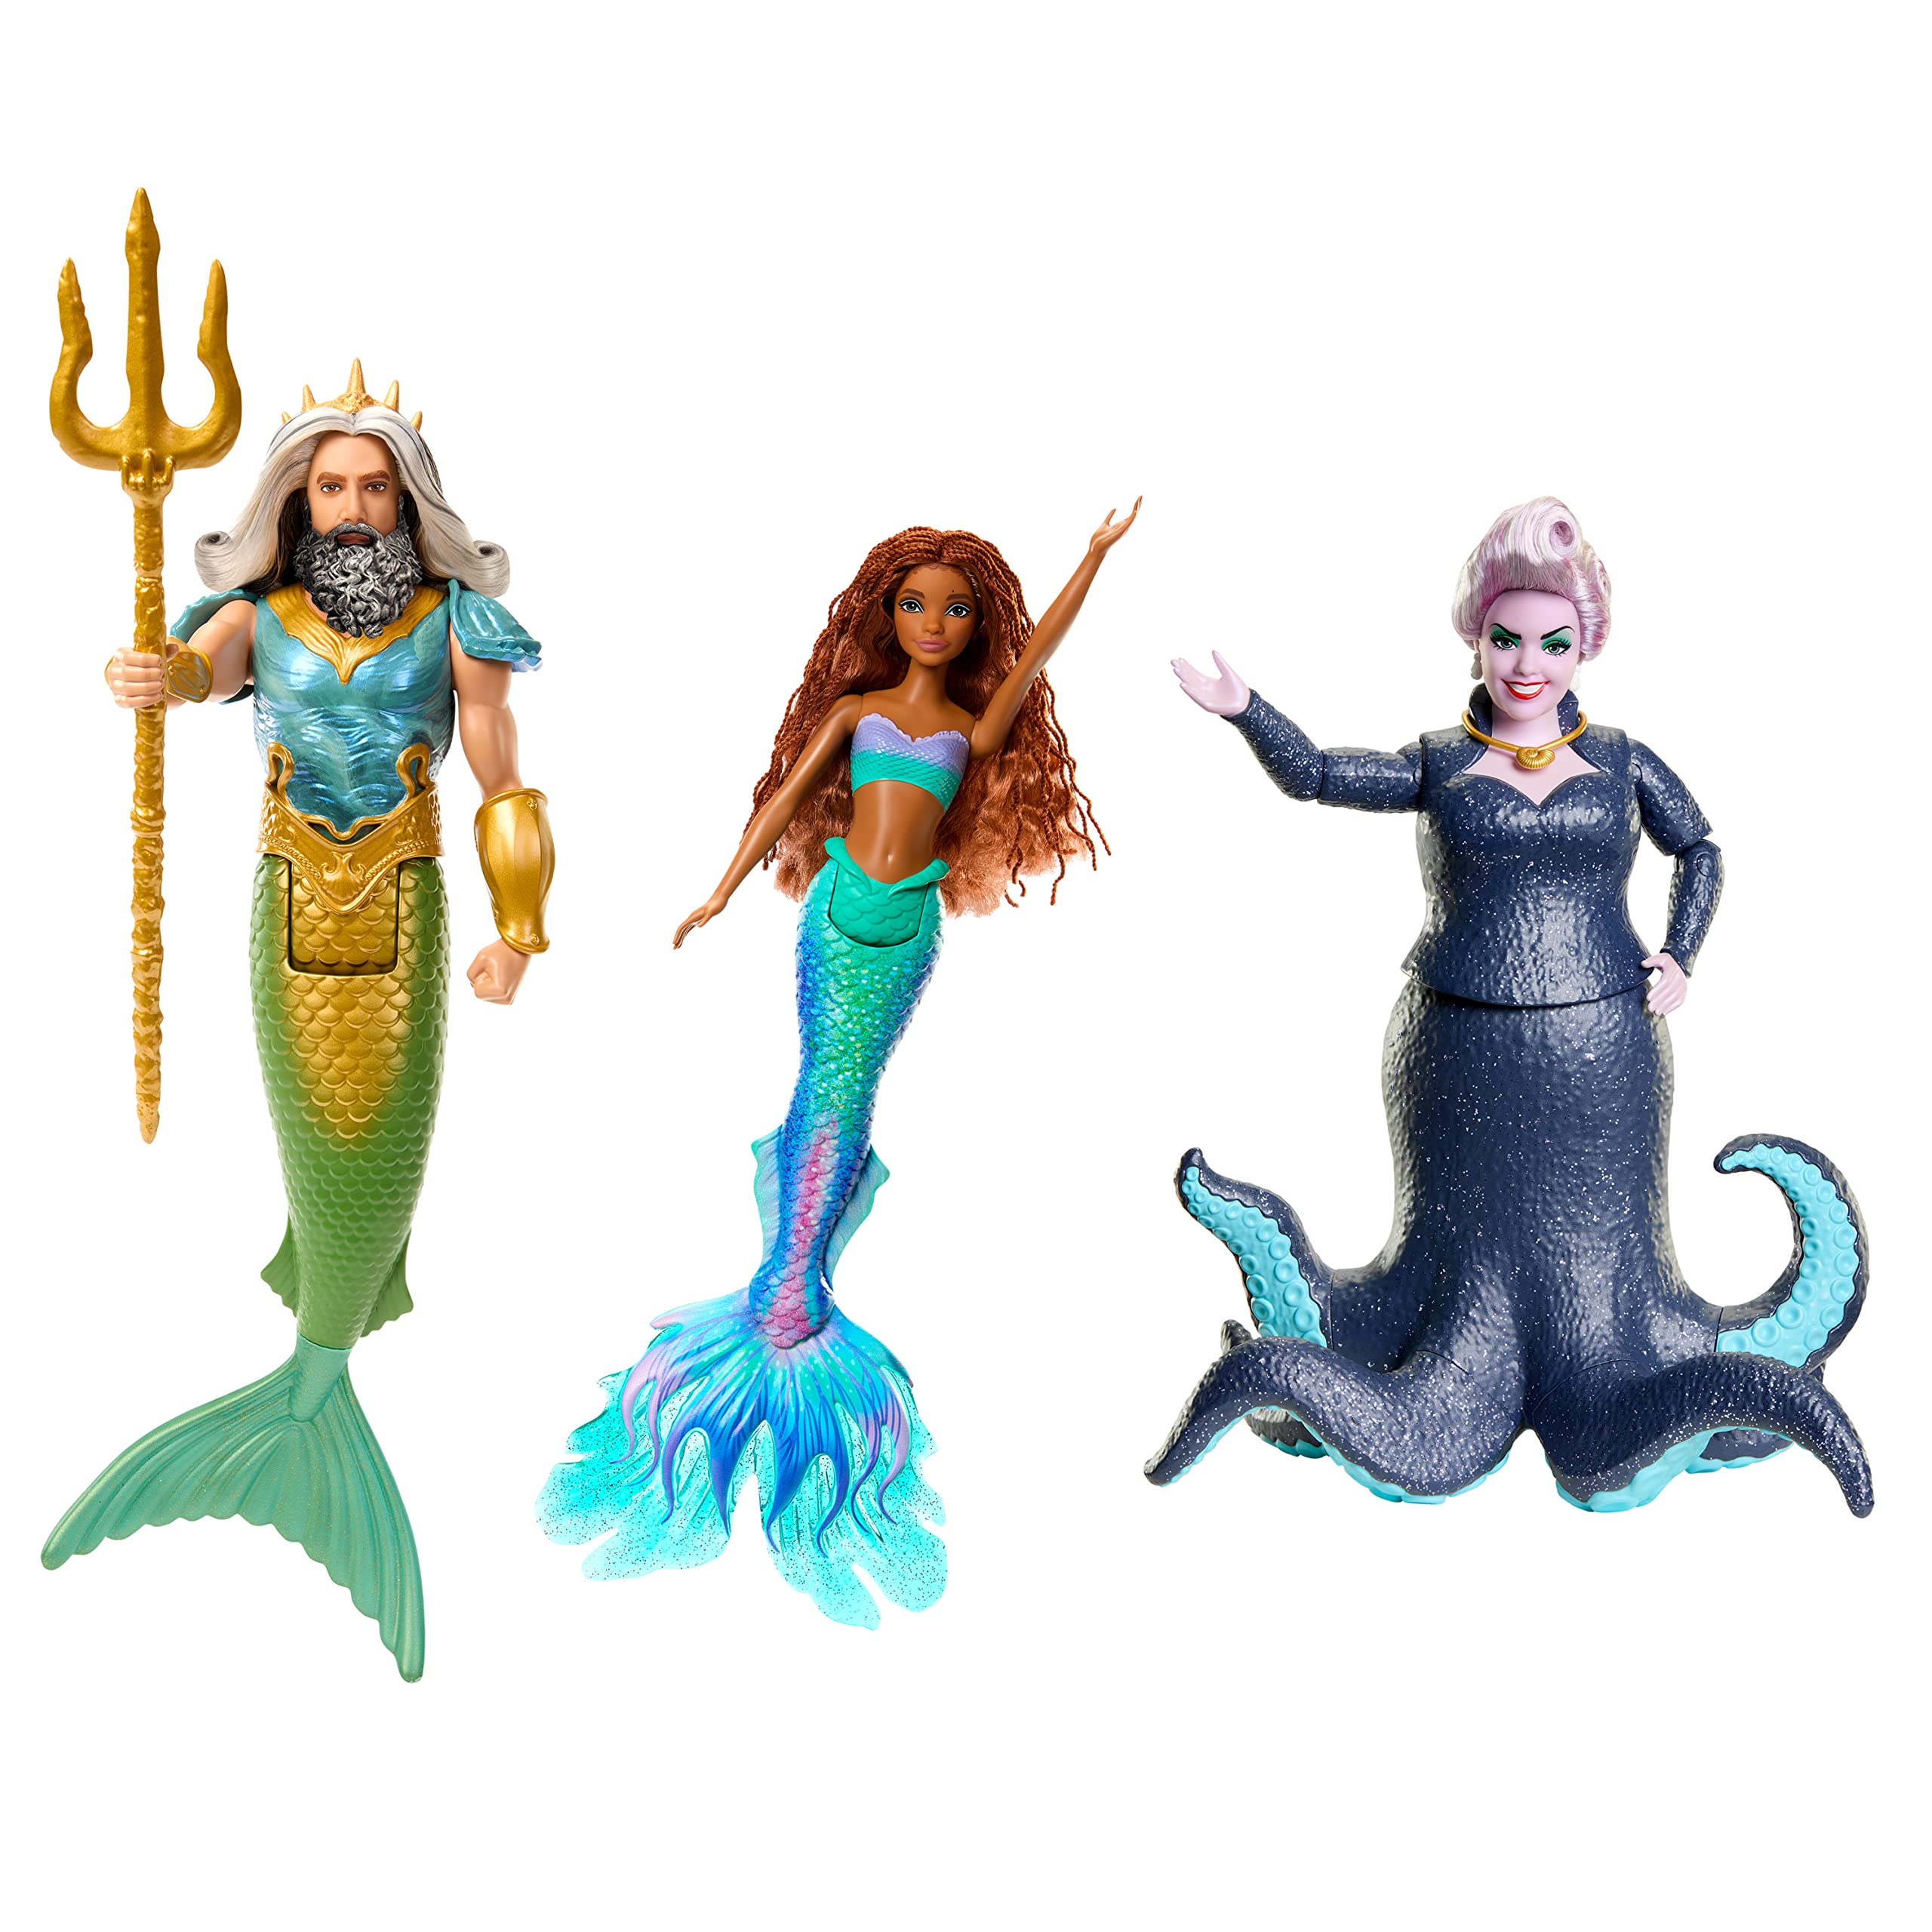 Disney The Little Mermaid Ariel, King Triton & Ursula Dolls, Set of 3 Fashion Dolls in Signature Outfits, Toys Inspired by the Movie (Amazon Exclusive)